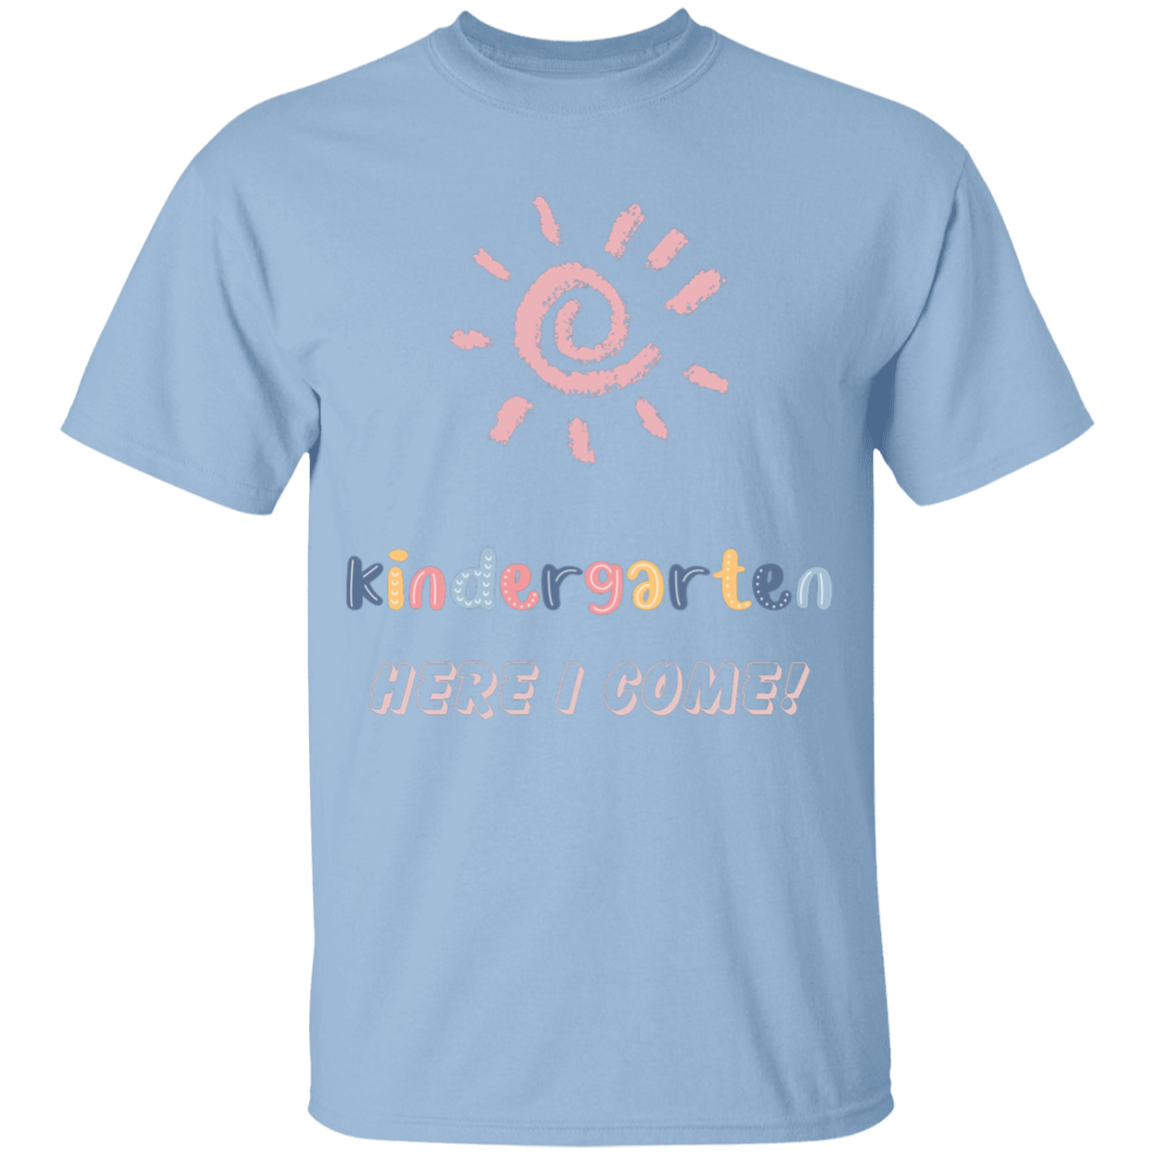 Get trendy with Youth kindergarten here I come! Tee Shirt - T-Shirts available at Good Gift Company. Grab yours for $20.42 today!